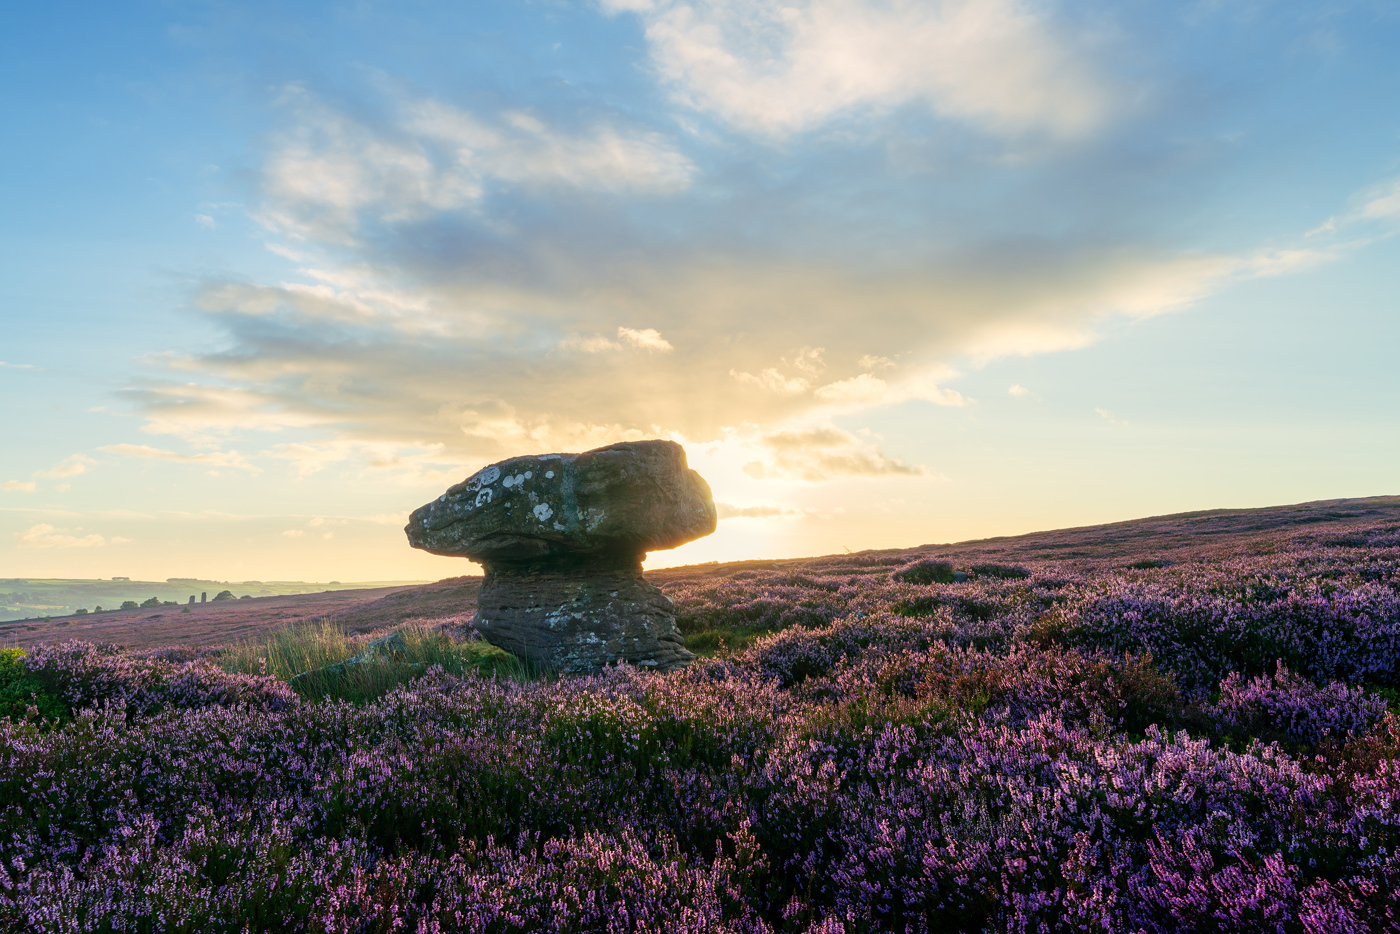 A unique rock formation stands amid a vibrant purple heather field, with the sun setting in the background, creating a warm sky with soft blue and yellow hues. a rock in a field of purple flowers